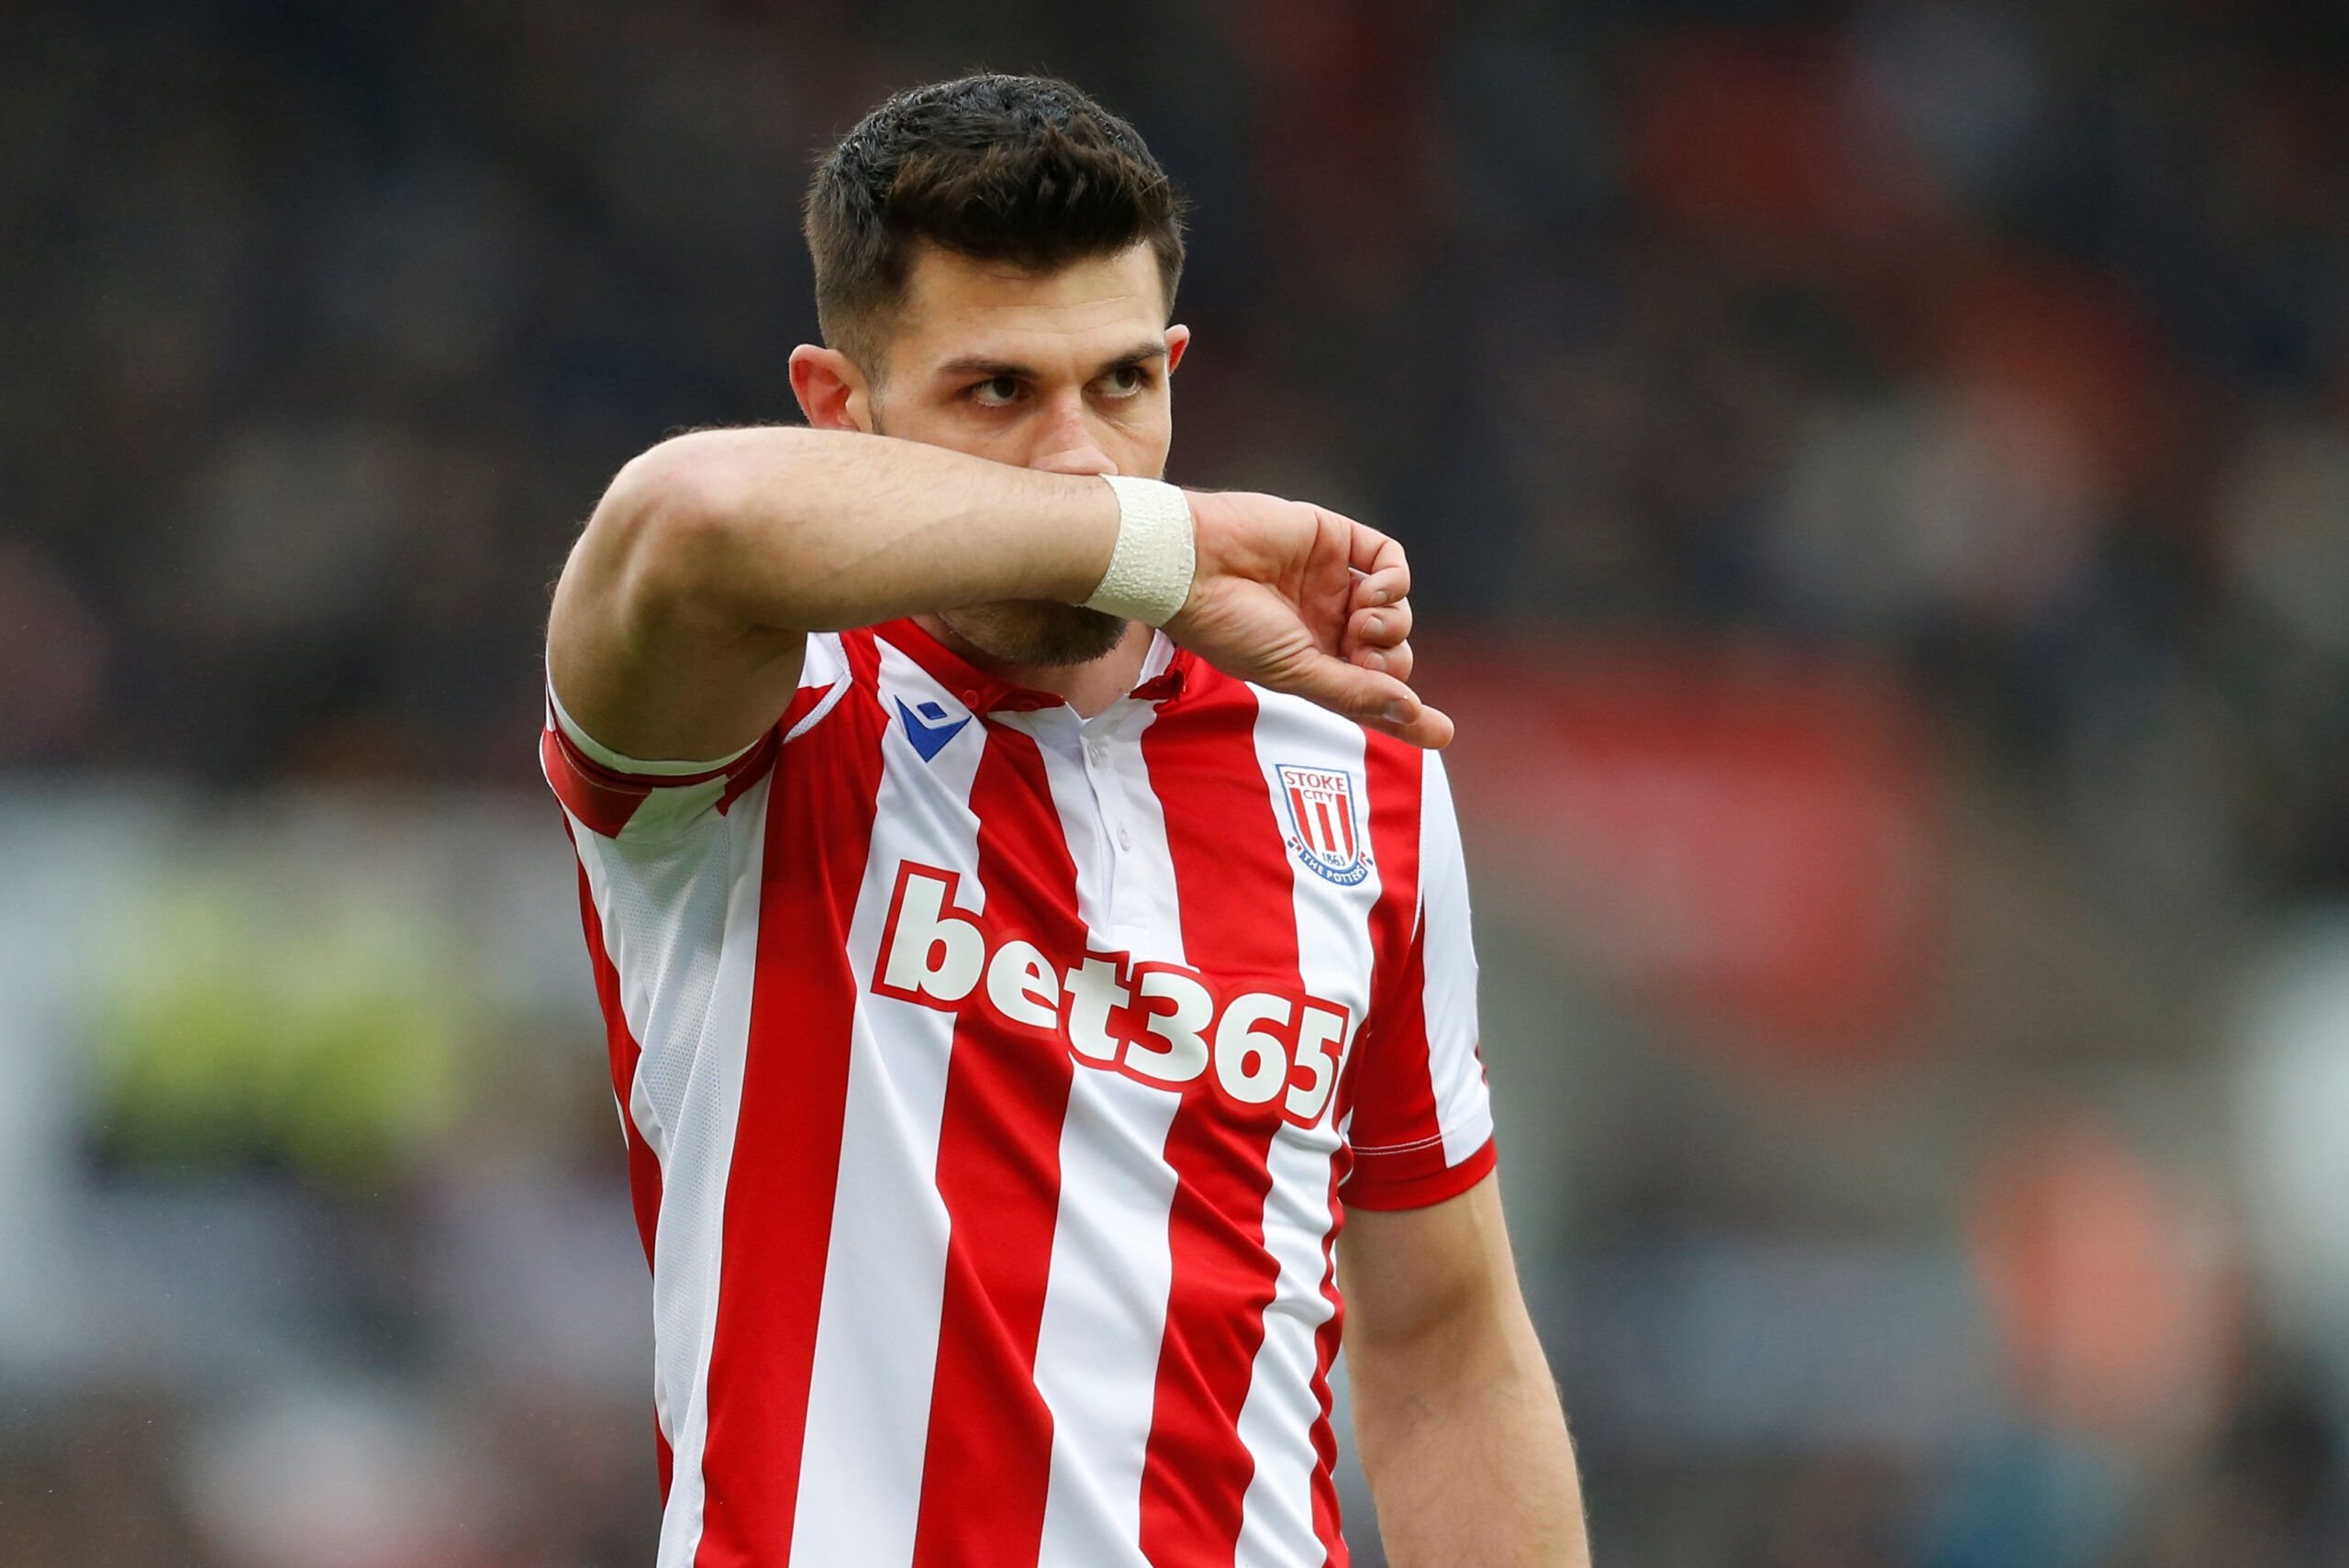 Soccer Football - Championship - Stoke City v Swansea City - bet365 Stadium, Stoke-on-Trent, Britain - January 25, 2020  Stoke City's Danny Batth   Action Images/Ed Sykes  EDITORIAL USE ONLY. No use with unauthorized audio, video, data, fixture lists, club/league logos or 